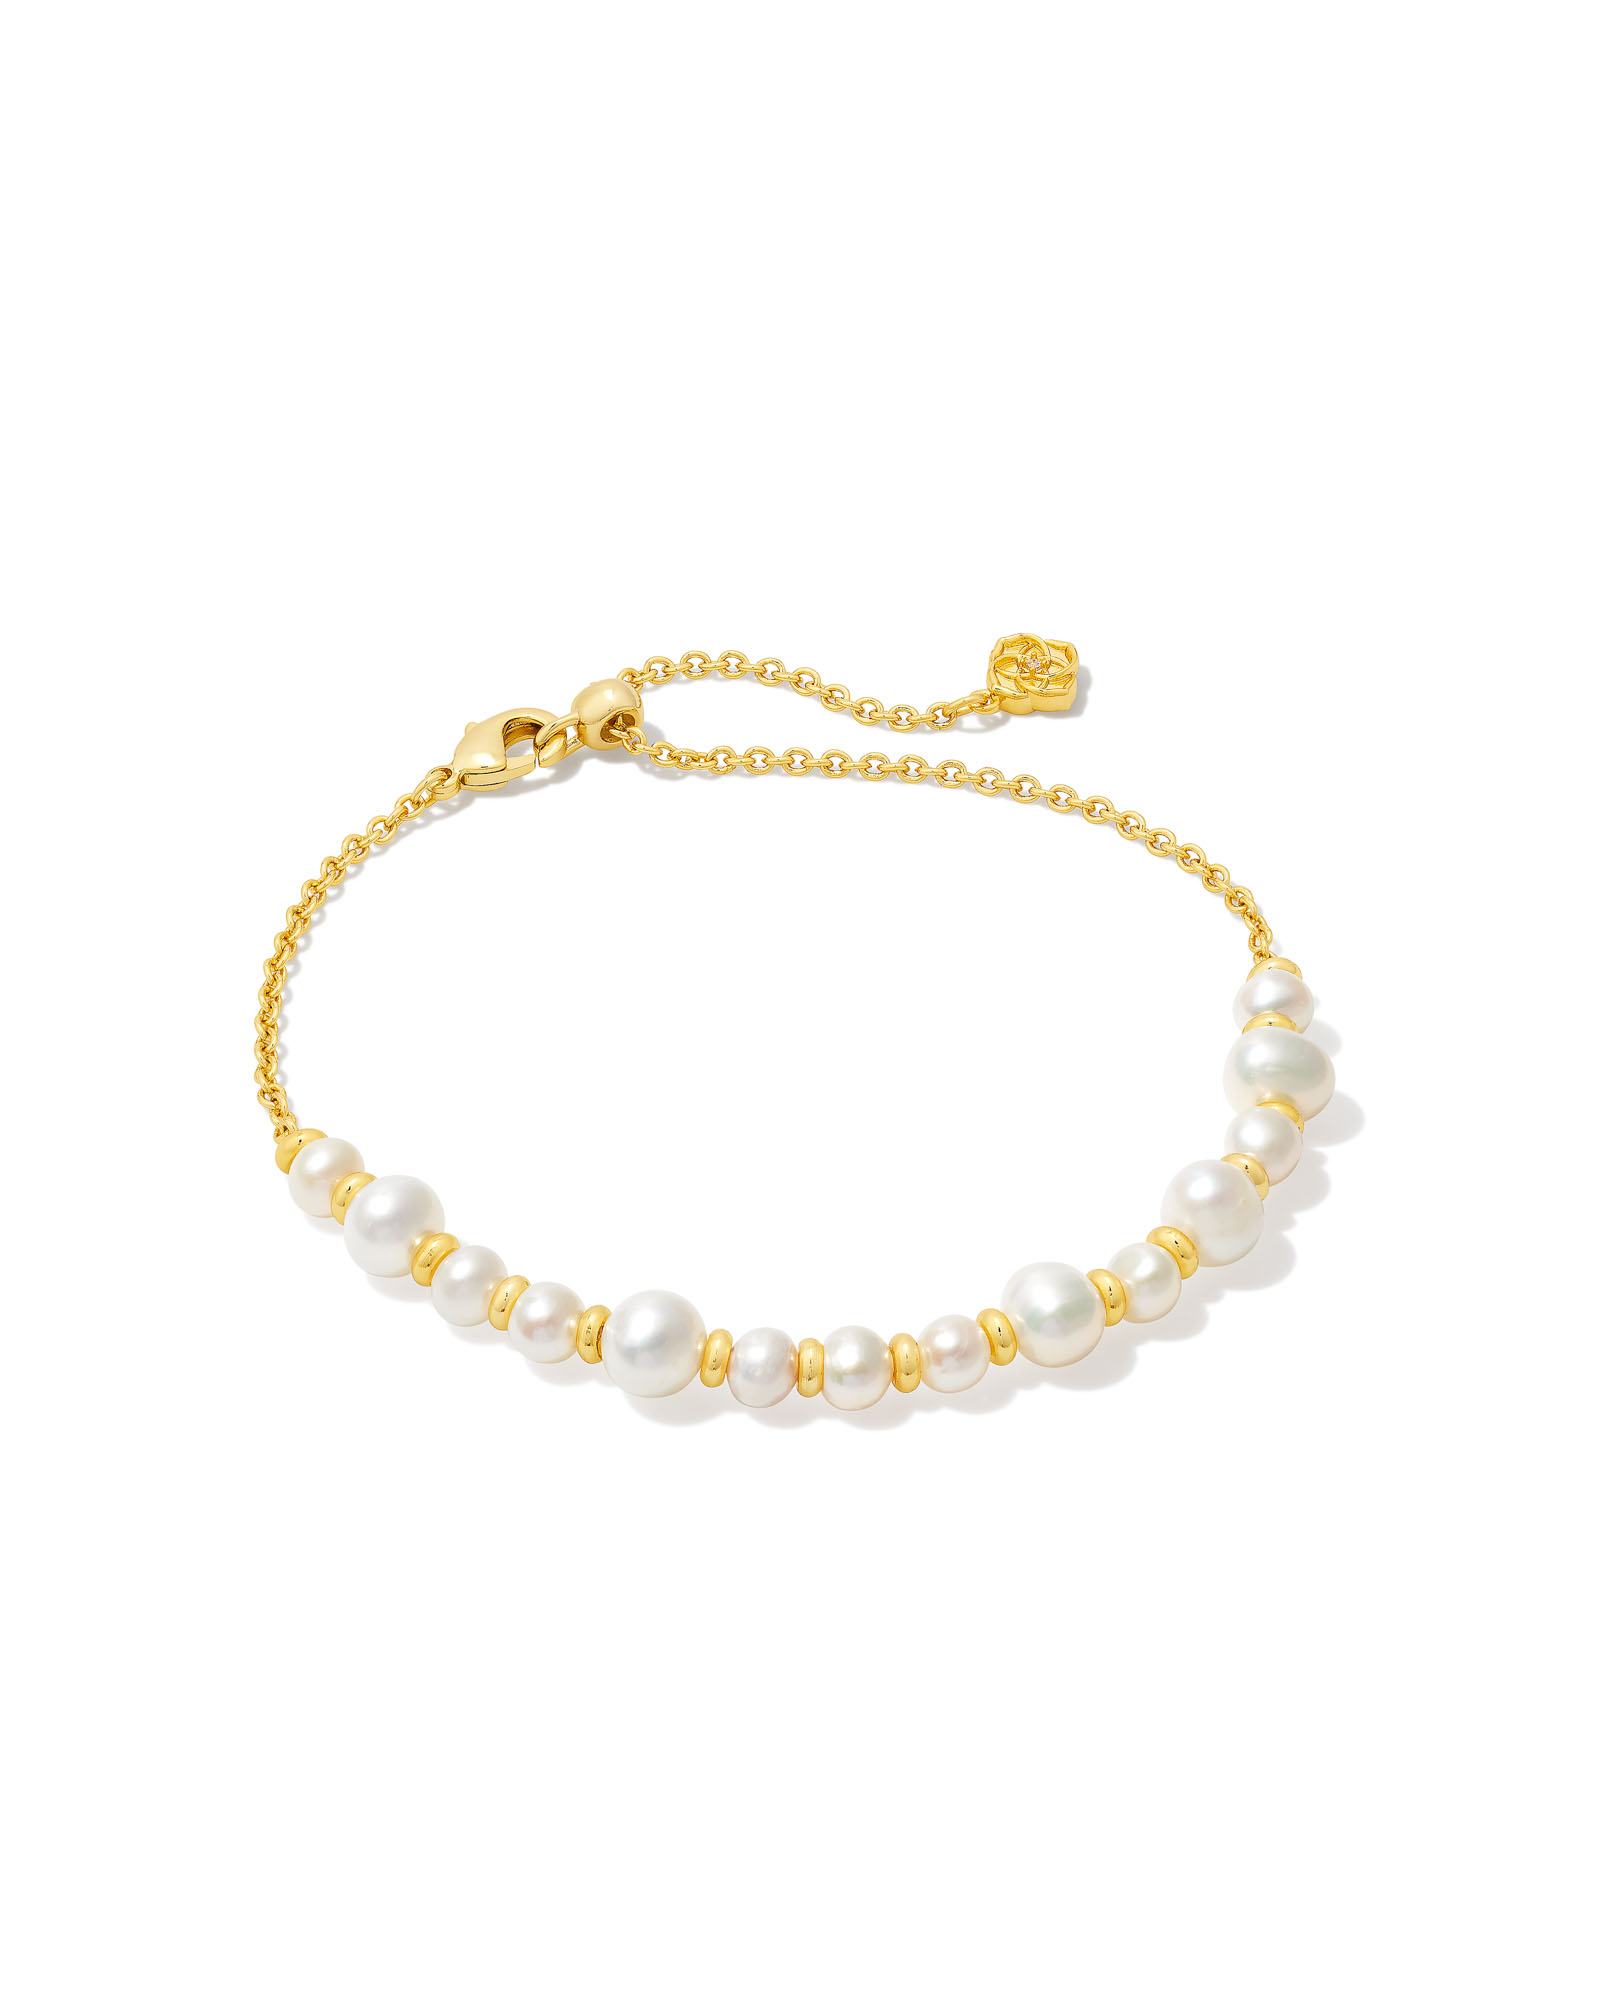 Women's Beaded Chain Bracelet in Ivory by Grace and Lace